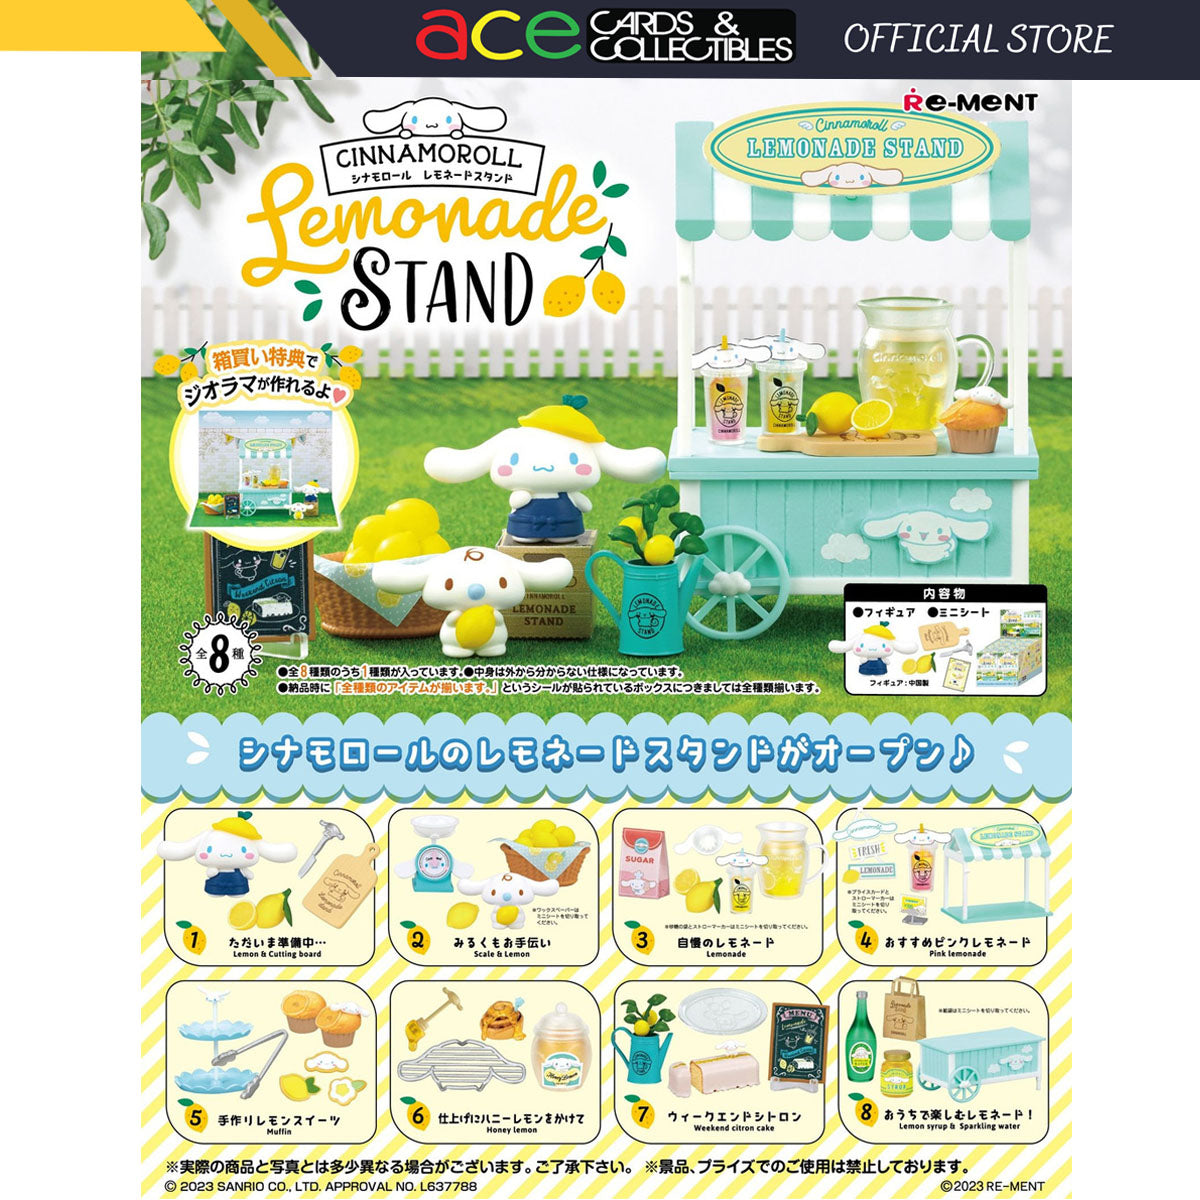 Re-Ment Cinnamoroll Lemonade Stand-Single Box (Random)-Re-Ment-Ace Cards & Collectibles